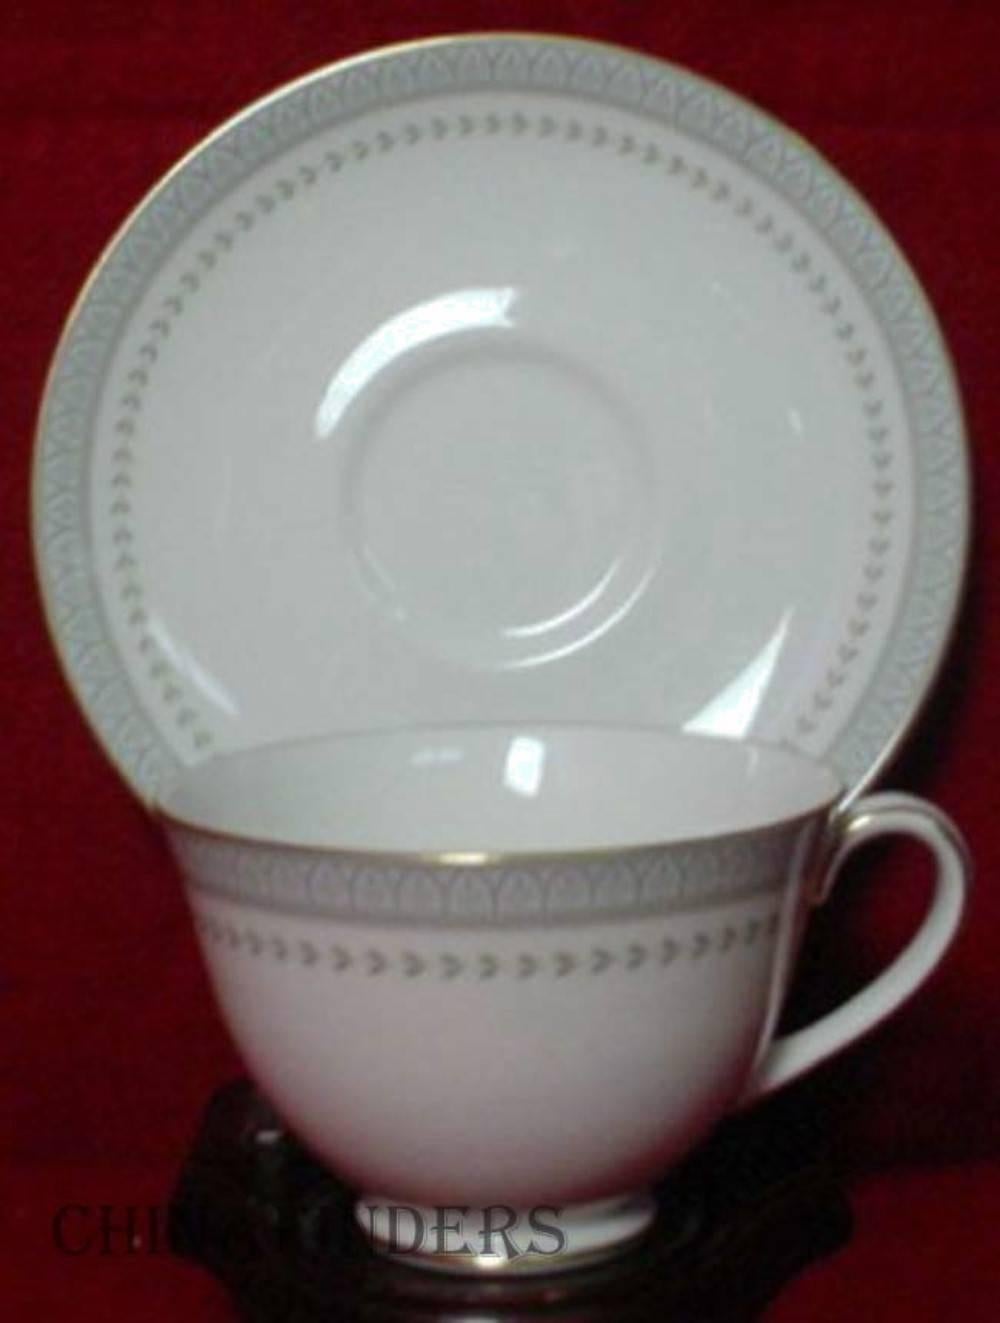 Royal Doulton China Berkshire TC1021 pattern 57 piece set service for 12,

in great condition free from chips, cracks, breaks or stains. Some items show minor wear.

Manufactured between 1984-1998.

Includes 10 cups, 12 saucers, 12 dinner